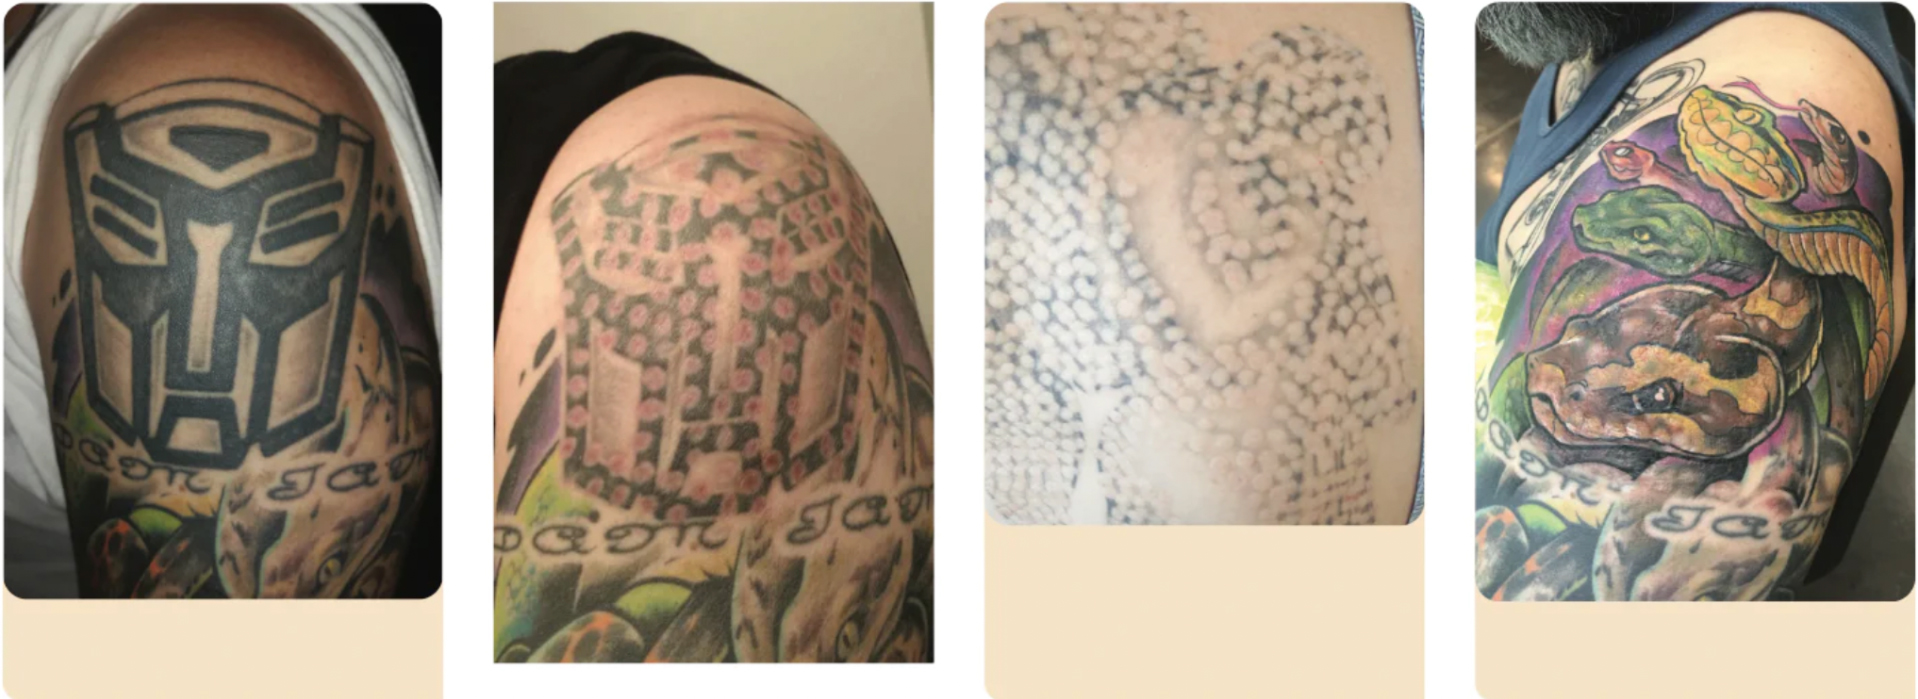 Tattoo Cover Ups, Revisions, and Replacements - Tatt2Away®